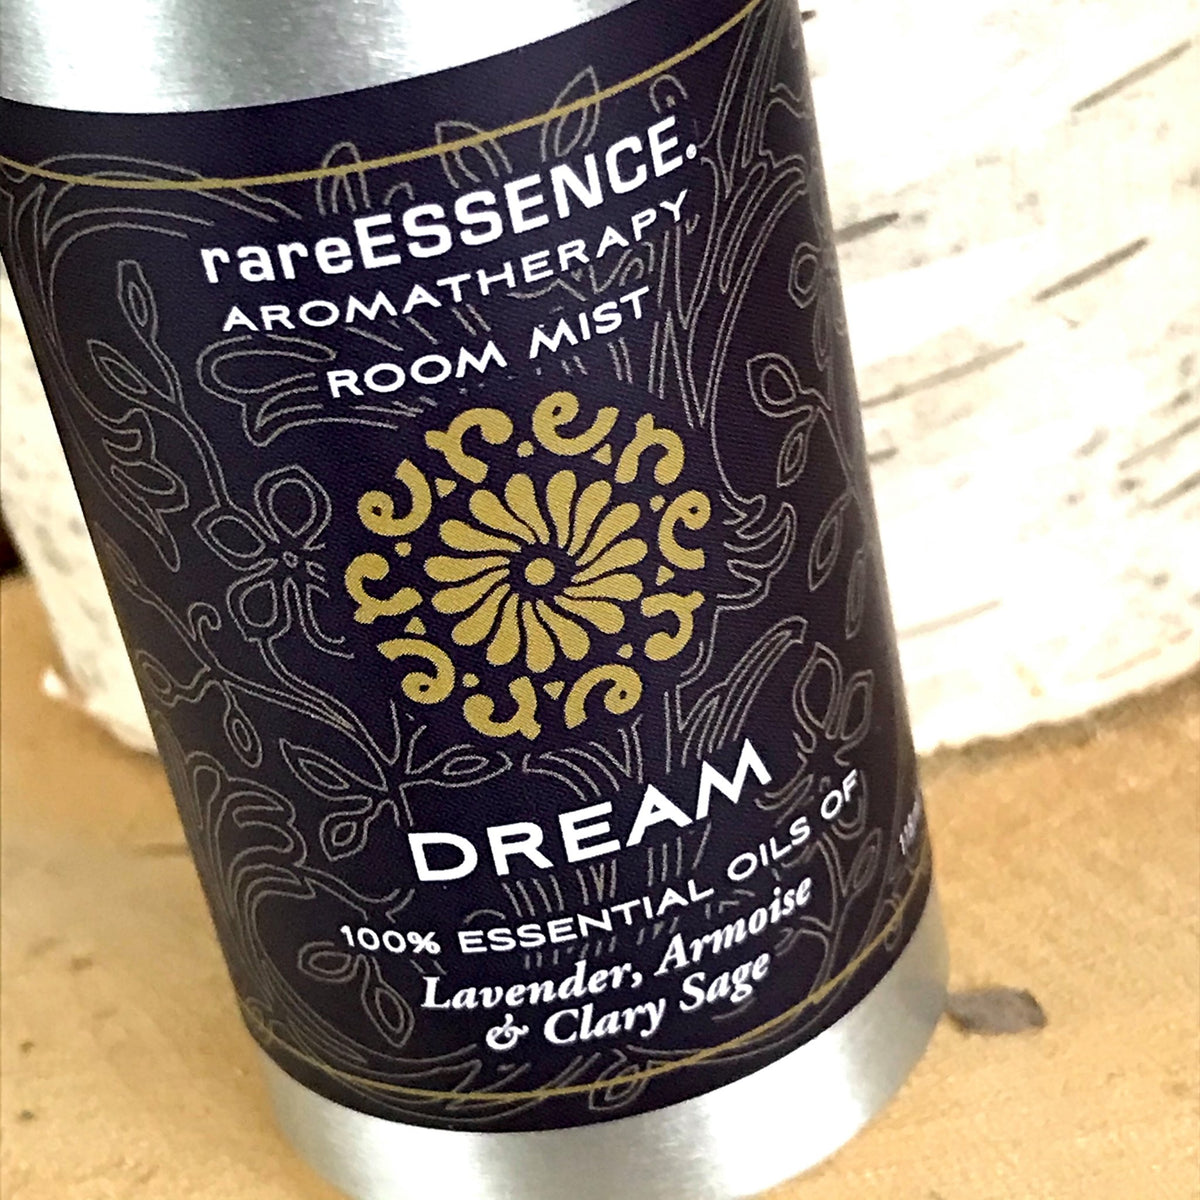 Dream room mist contains 100% pure lavender, armoise, and clary sage essential oils.